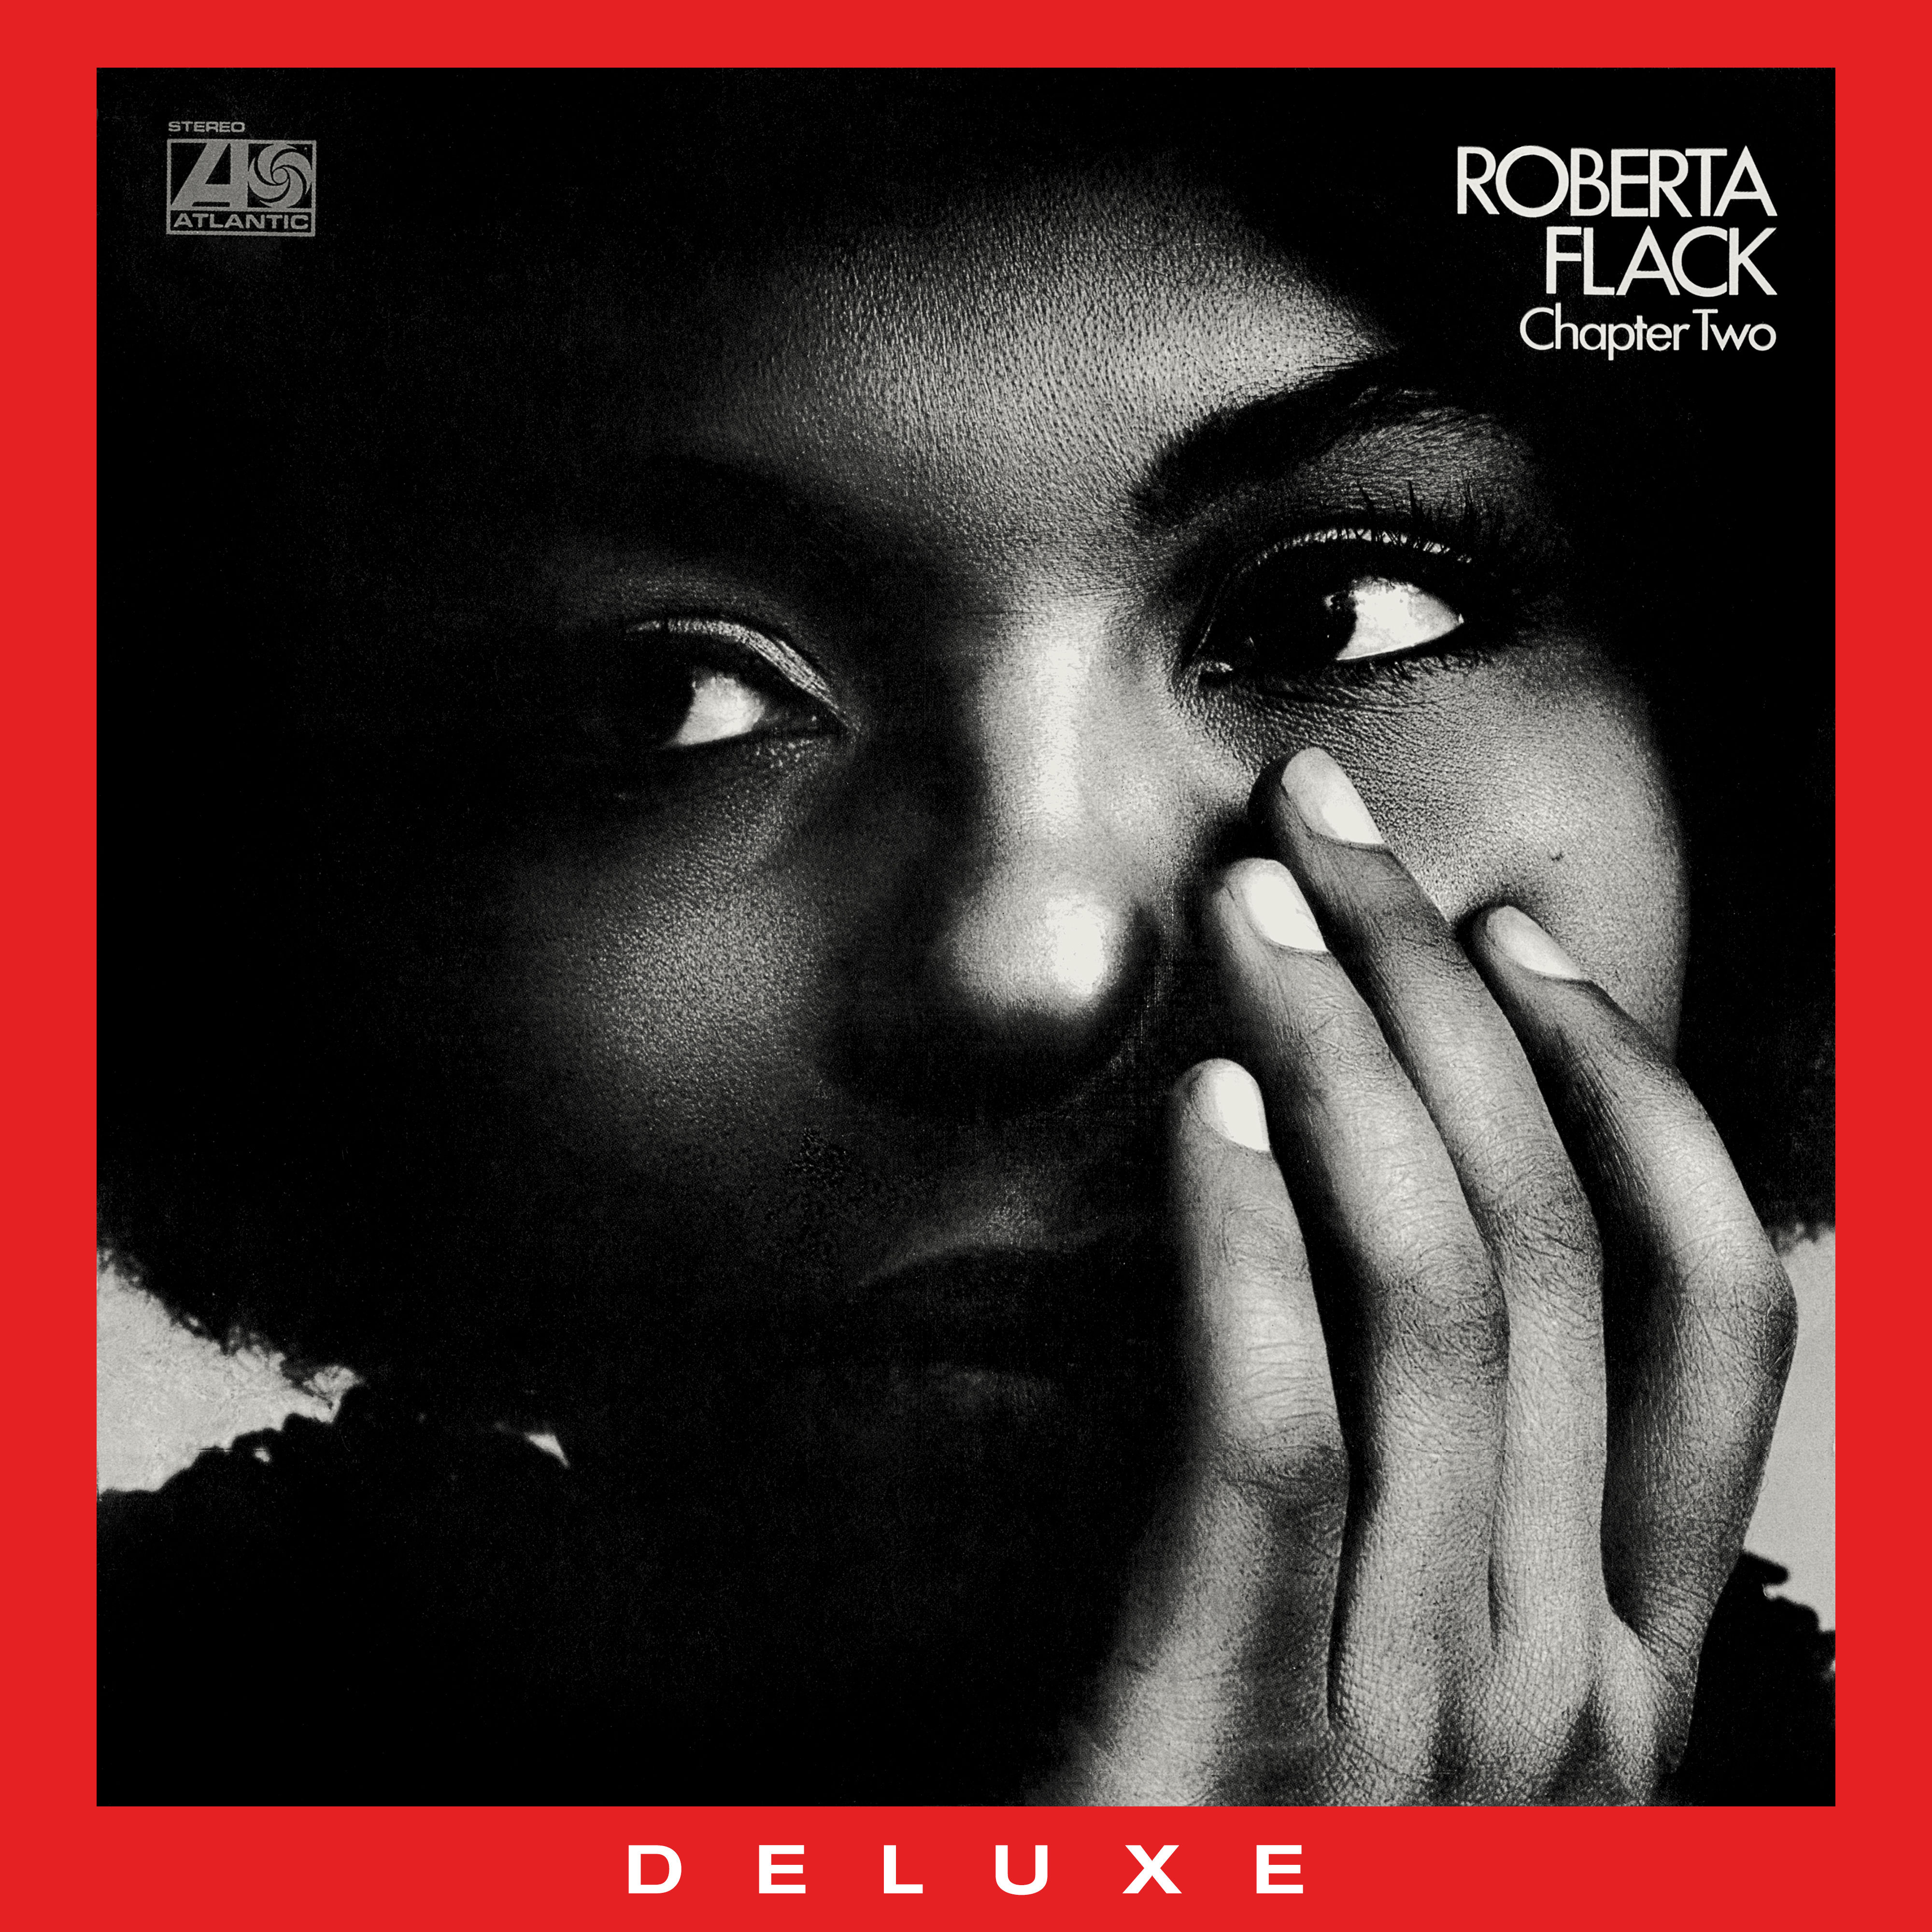 Roberta Flack - Chapter Two (50th Anniversary Edition) (2021 Remaster) (1970/2021) [FLAC 24bit/192kHz]